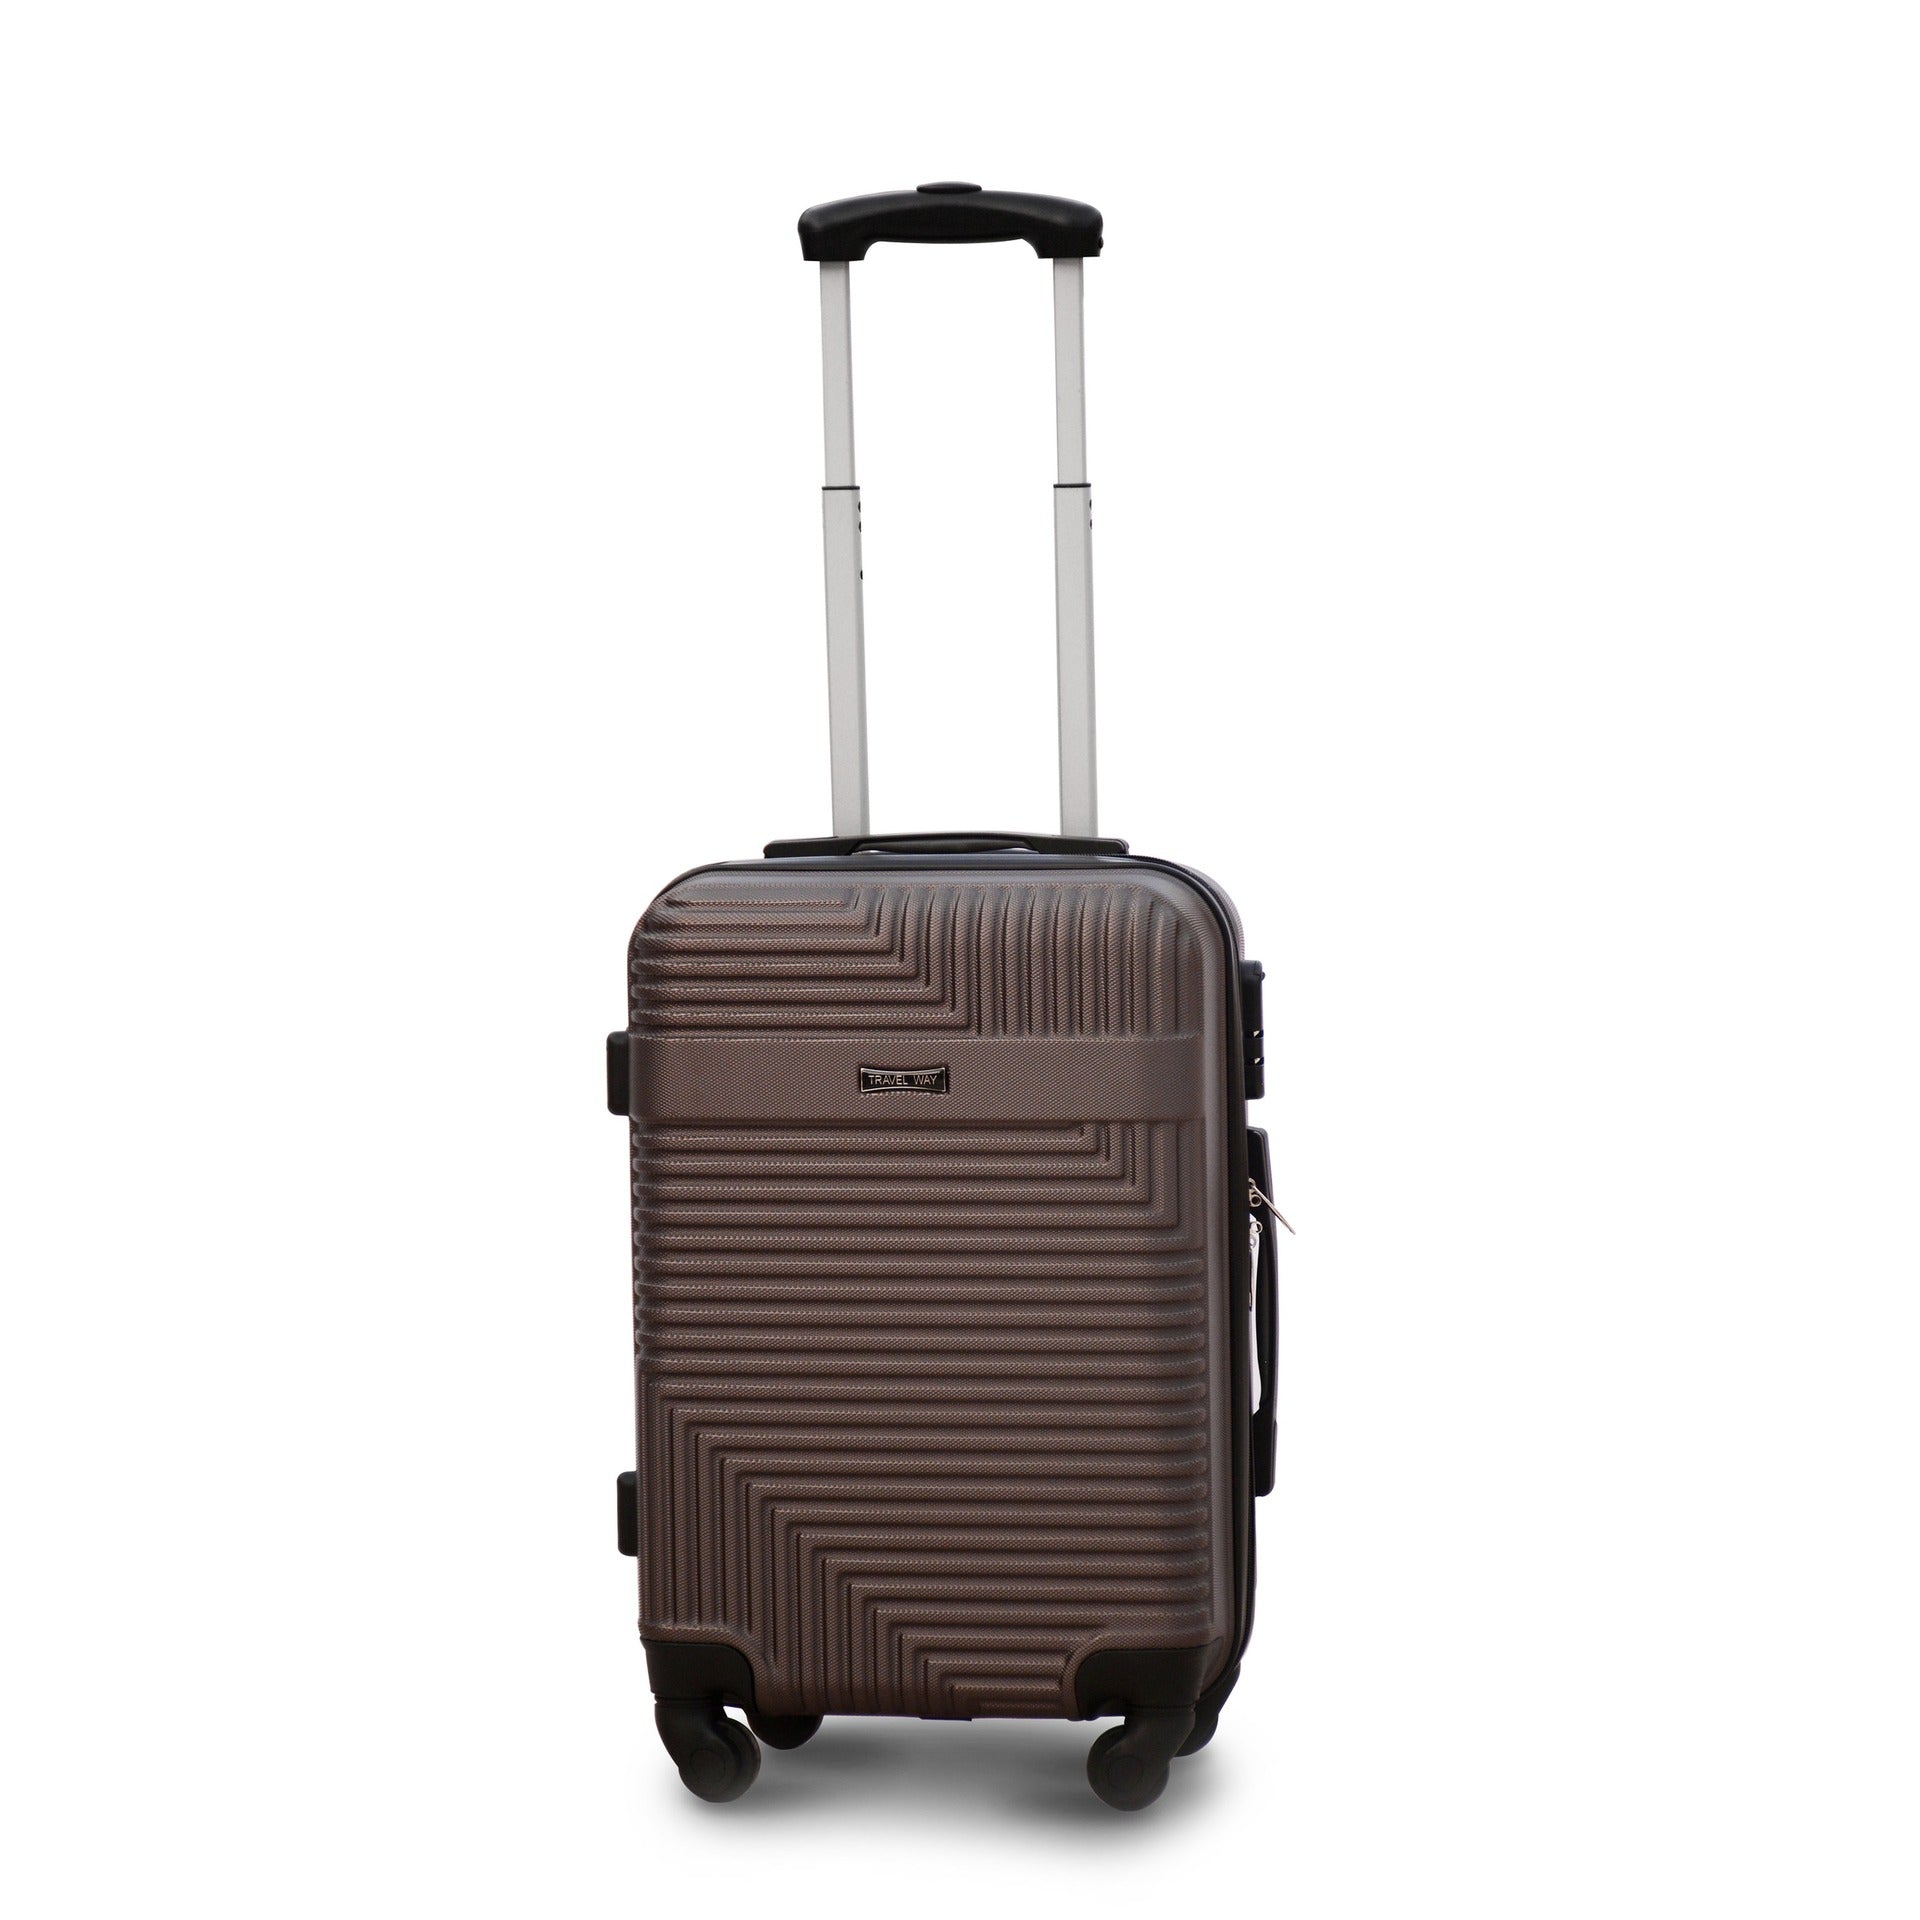 20" Brown Colour Travel Way ABS Luggage Lightweight Hard Case Carry On Trolley Bag Zaappy.com